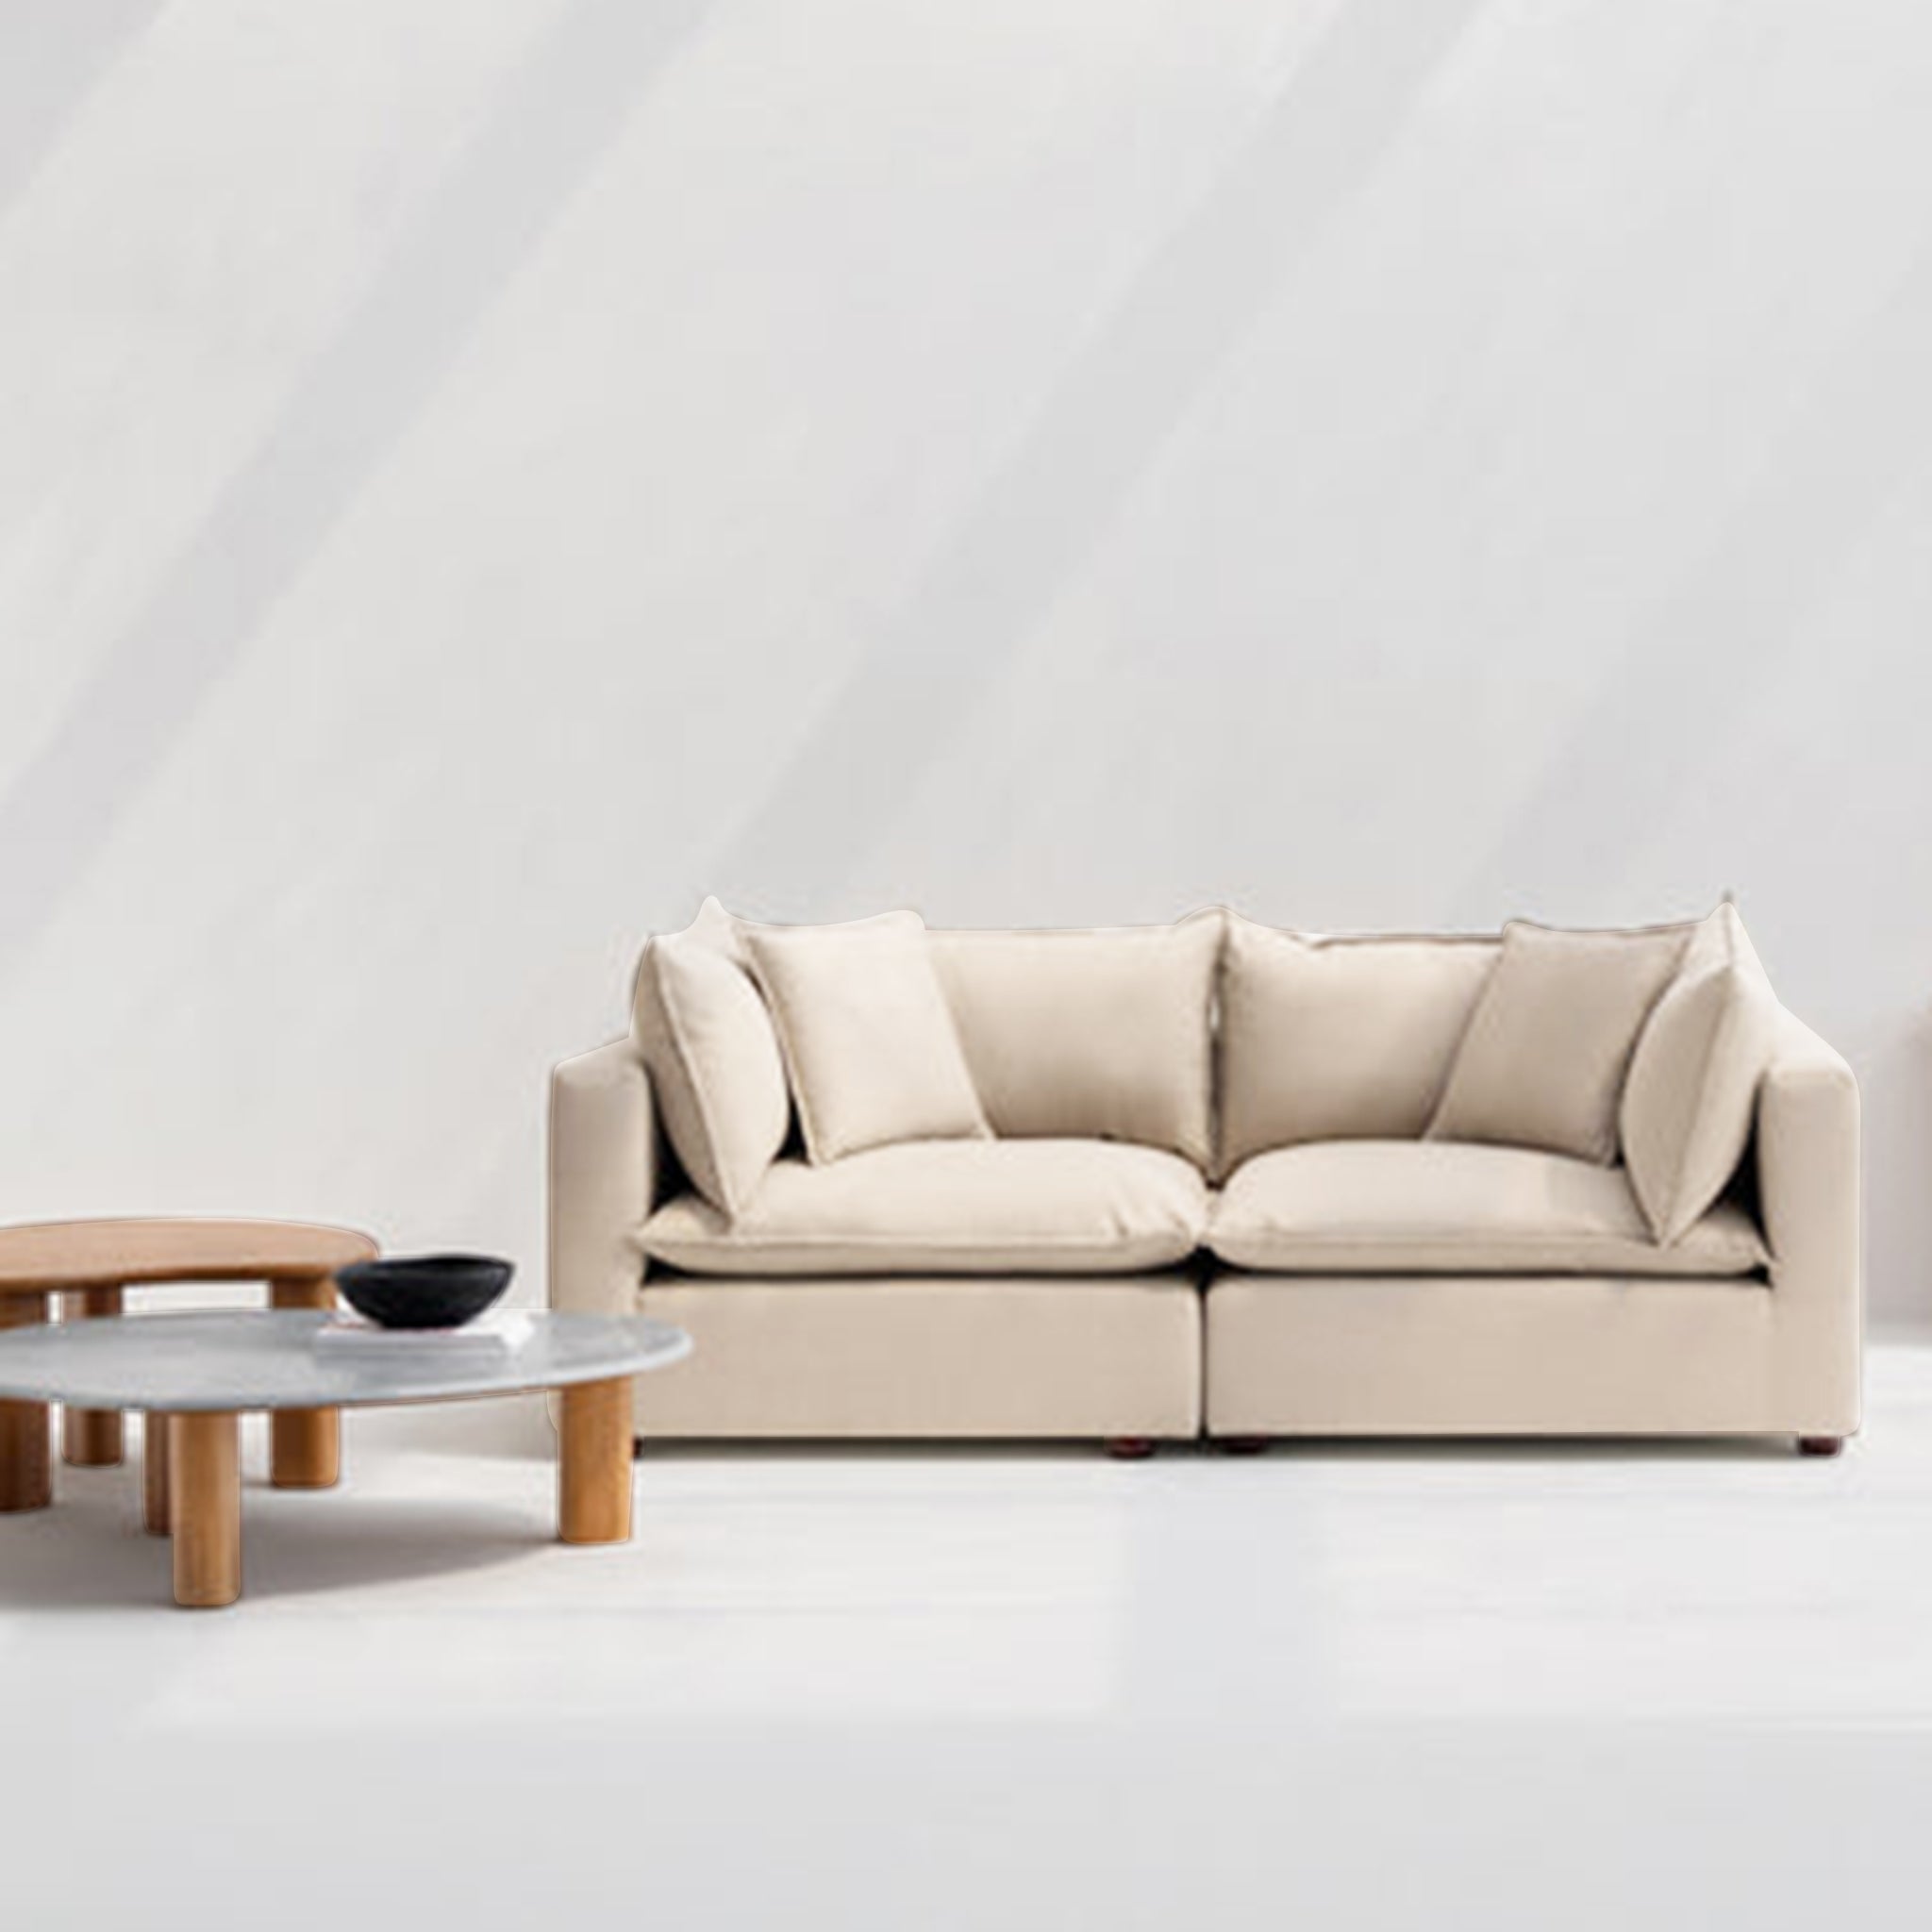 Beige loveseat sofa with plush cushions in a modern living room setting, complemented by wooden coffee tables and minimalist decor.